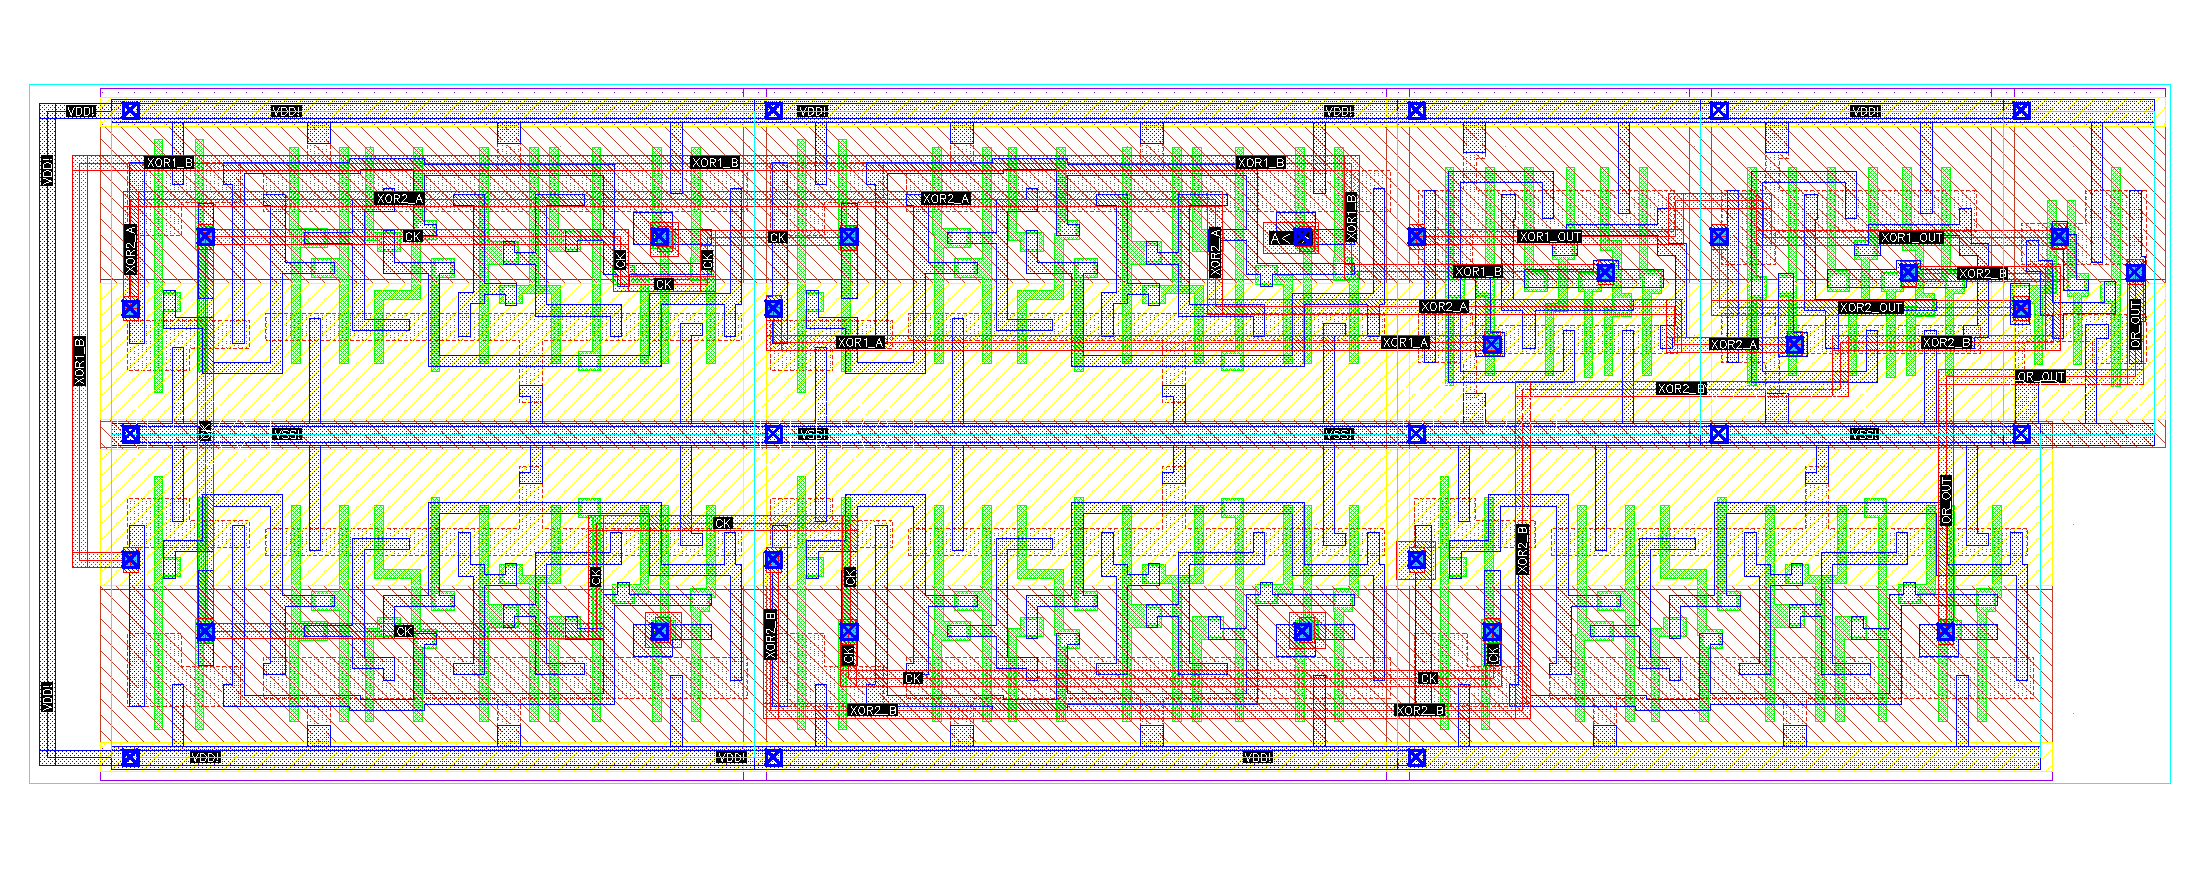 Layout of the 2-Bit Comparator